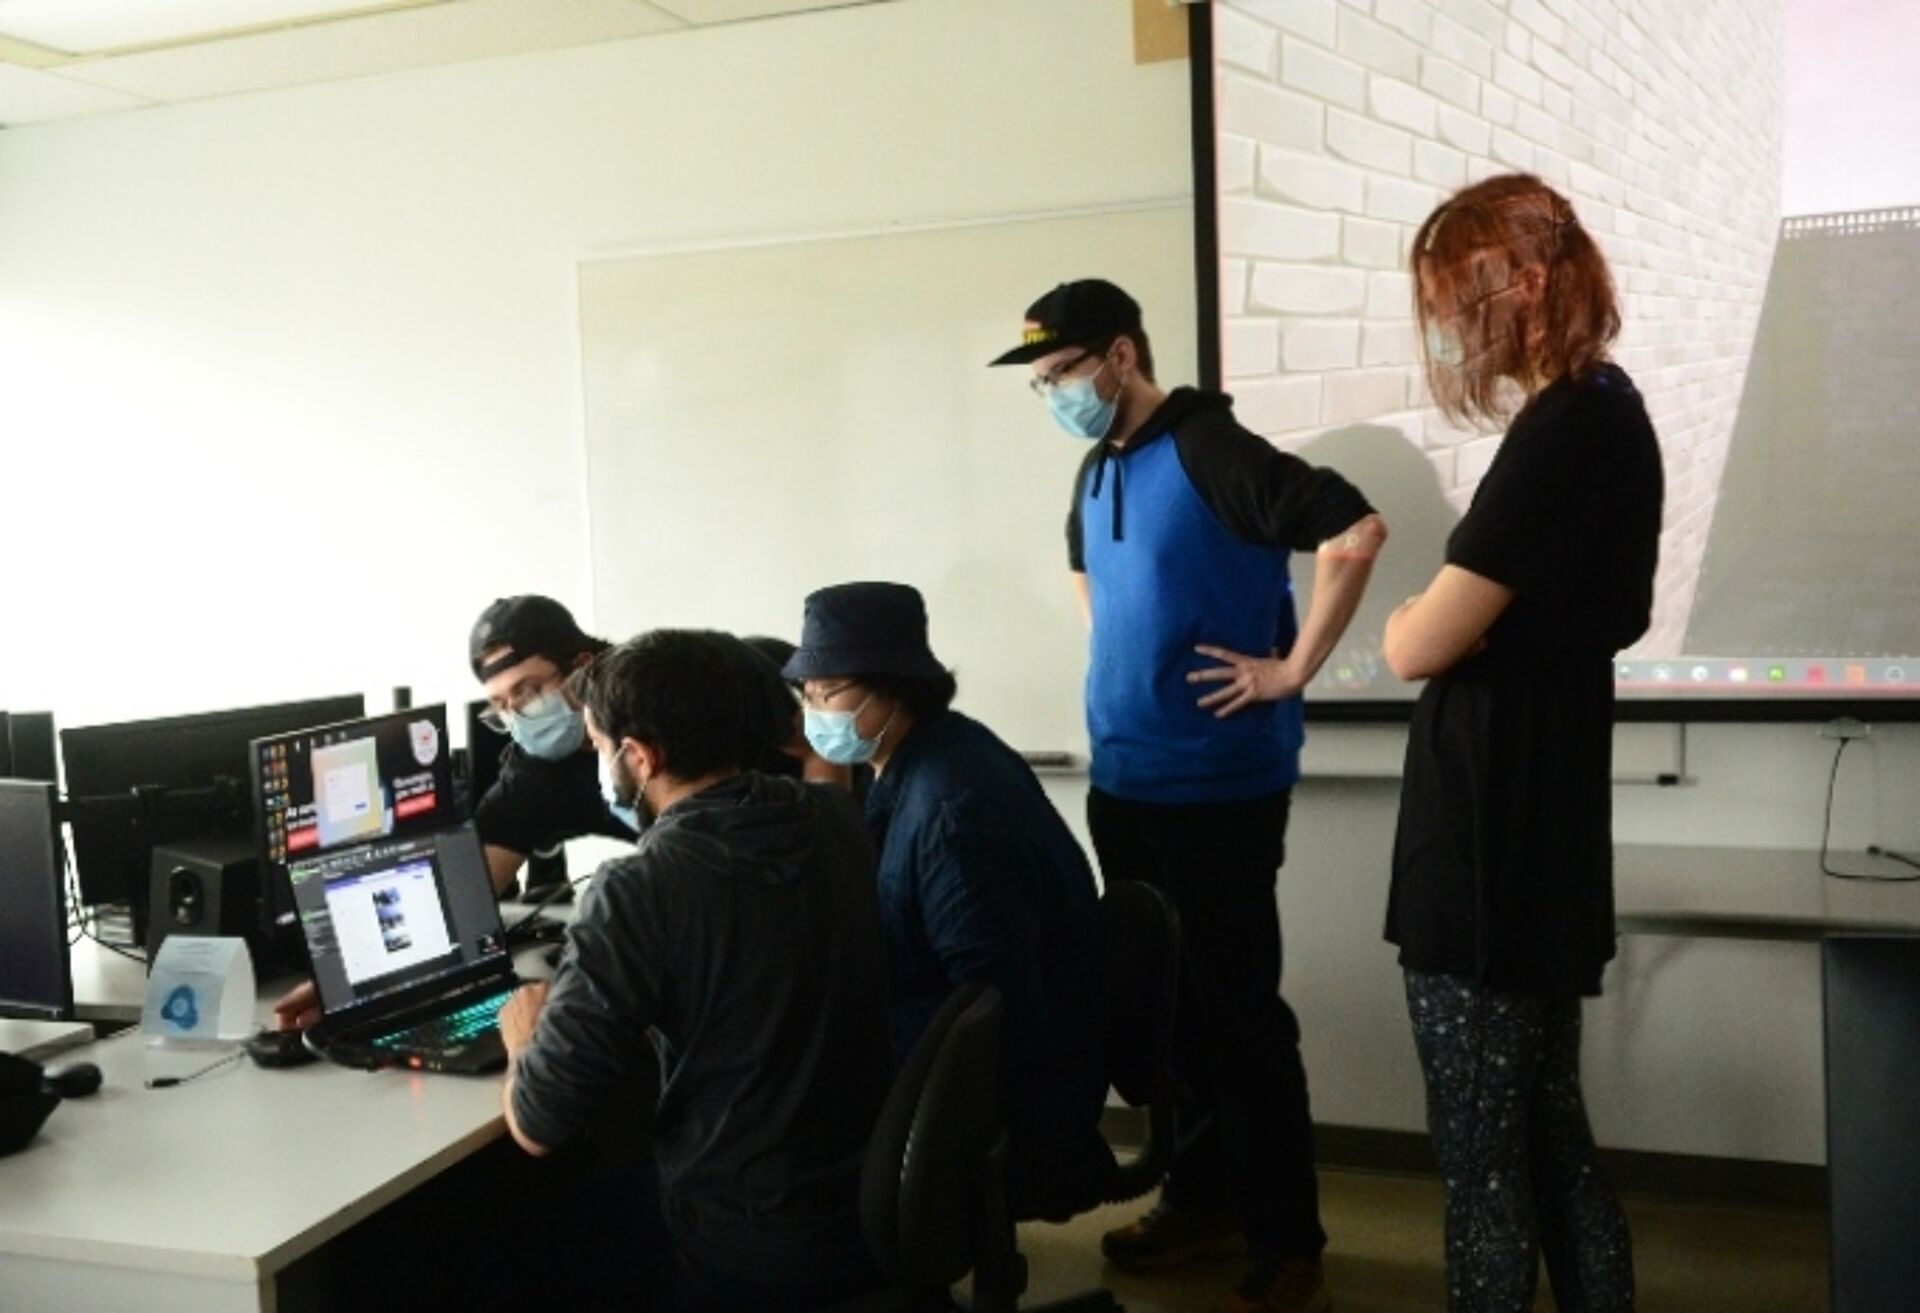 A team of tech professionals wearing masks collaborates at a workstation in an office environment.